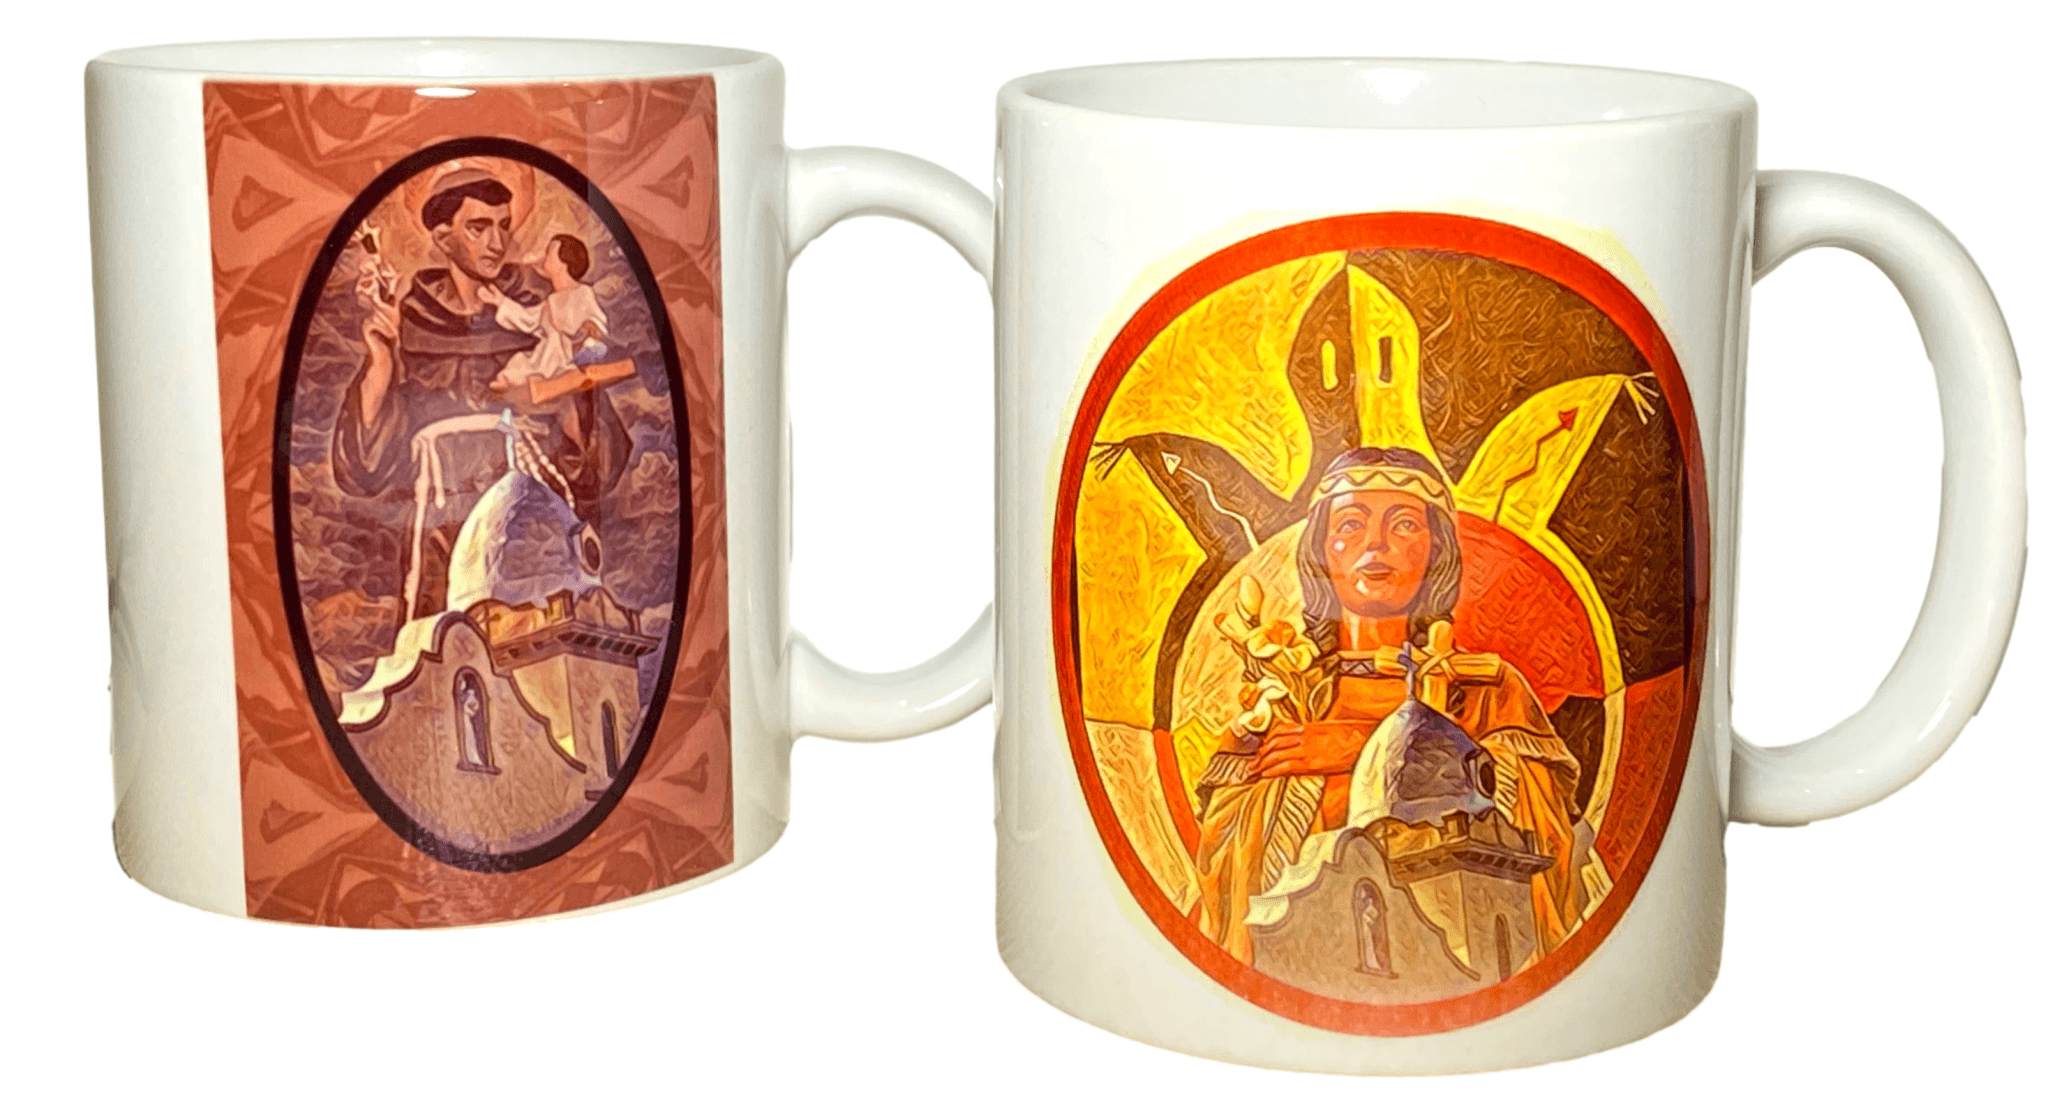 Coffee Cup Ceramic White Tigua Native American Created Images from Ysleta Mission 3 3/4 L x 4 1/2 W Inches - Ysleta Mission Gift Shop- VOTED El Paso's Best Gift Shop